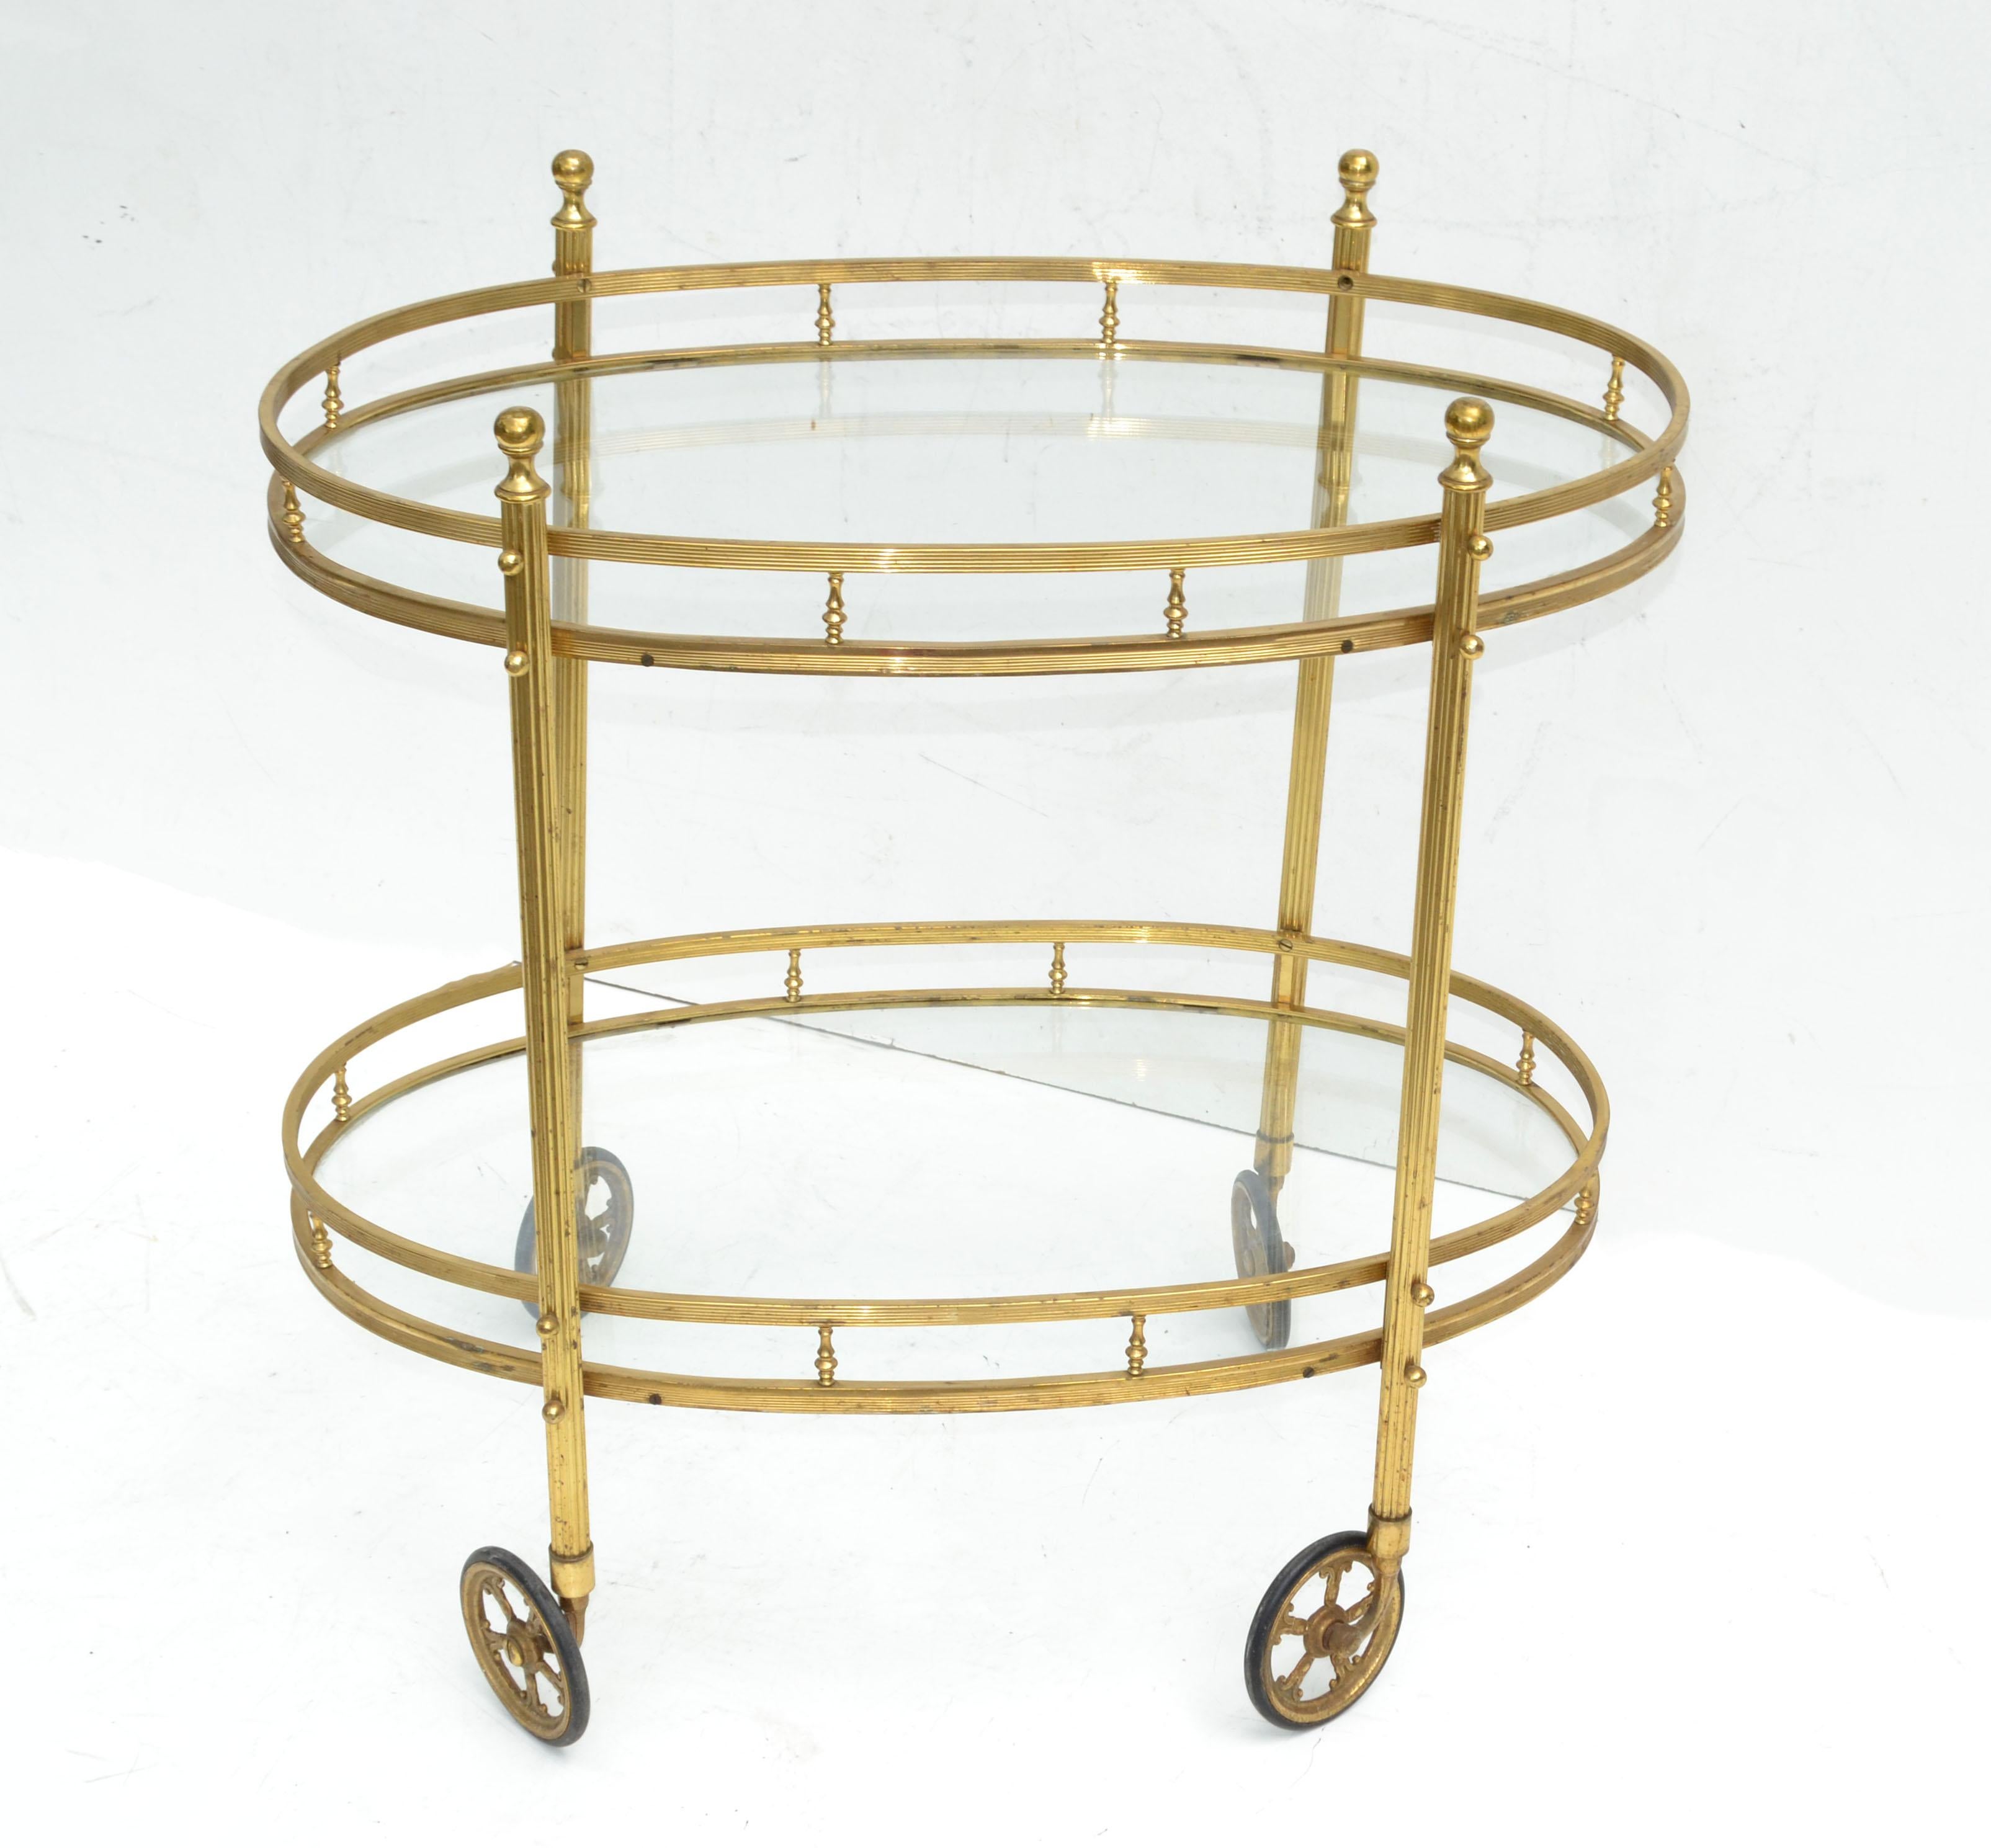 Superb bar cart made by Maison Bagués in France circa 1950.
Features 2 tier glass shelves with brass detail in oval shape.
Space in between measures 13 inches.